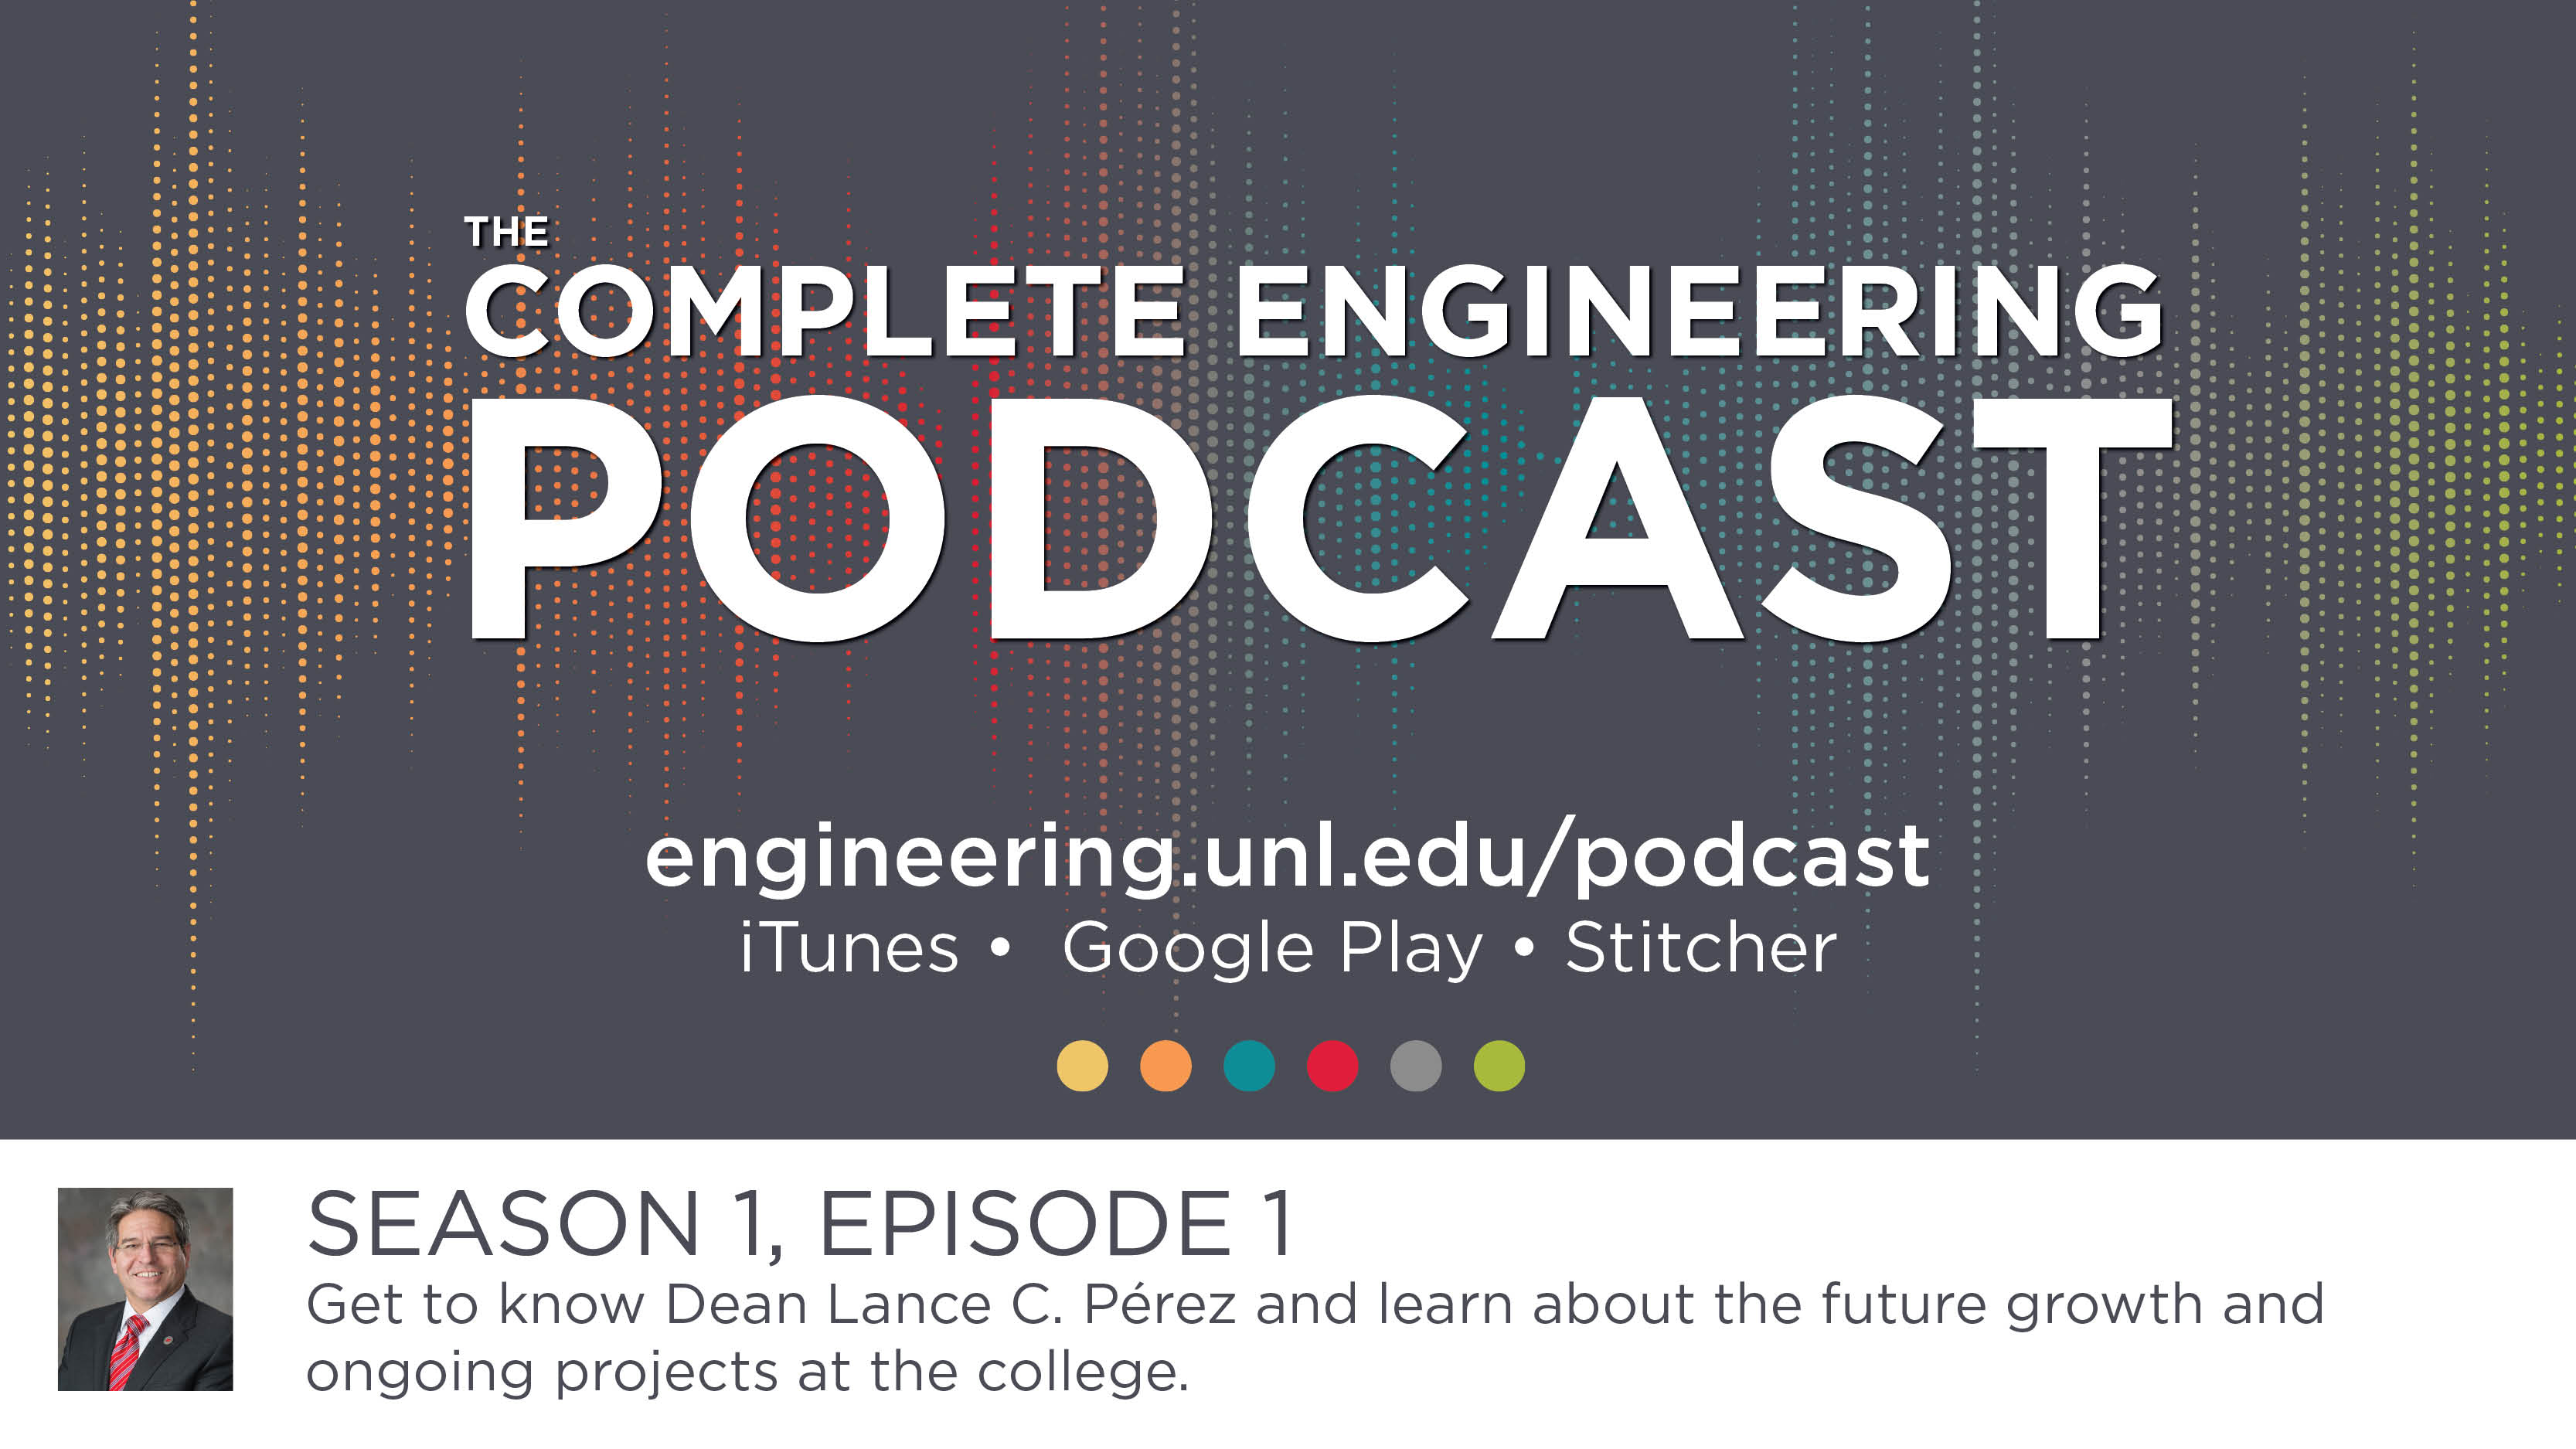 The Complete Engineering Podcast